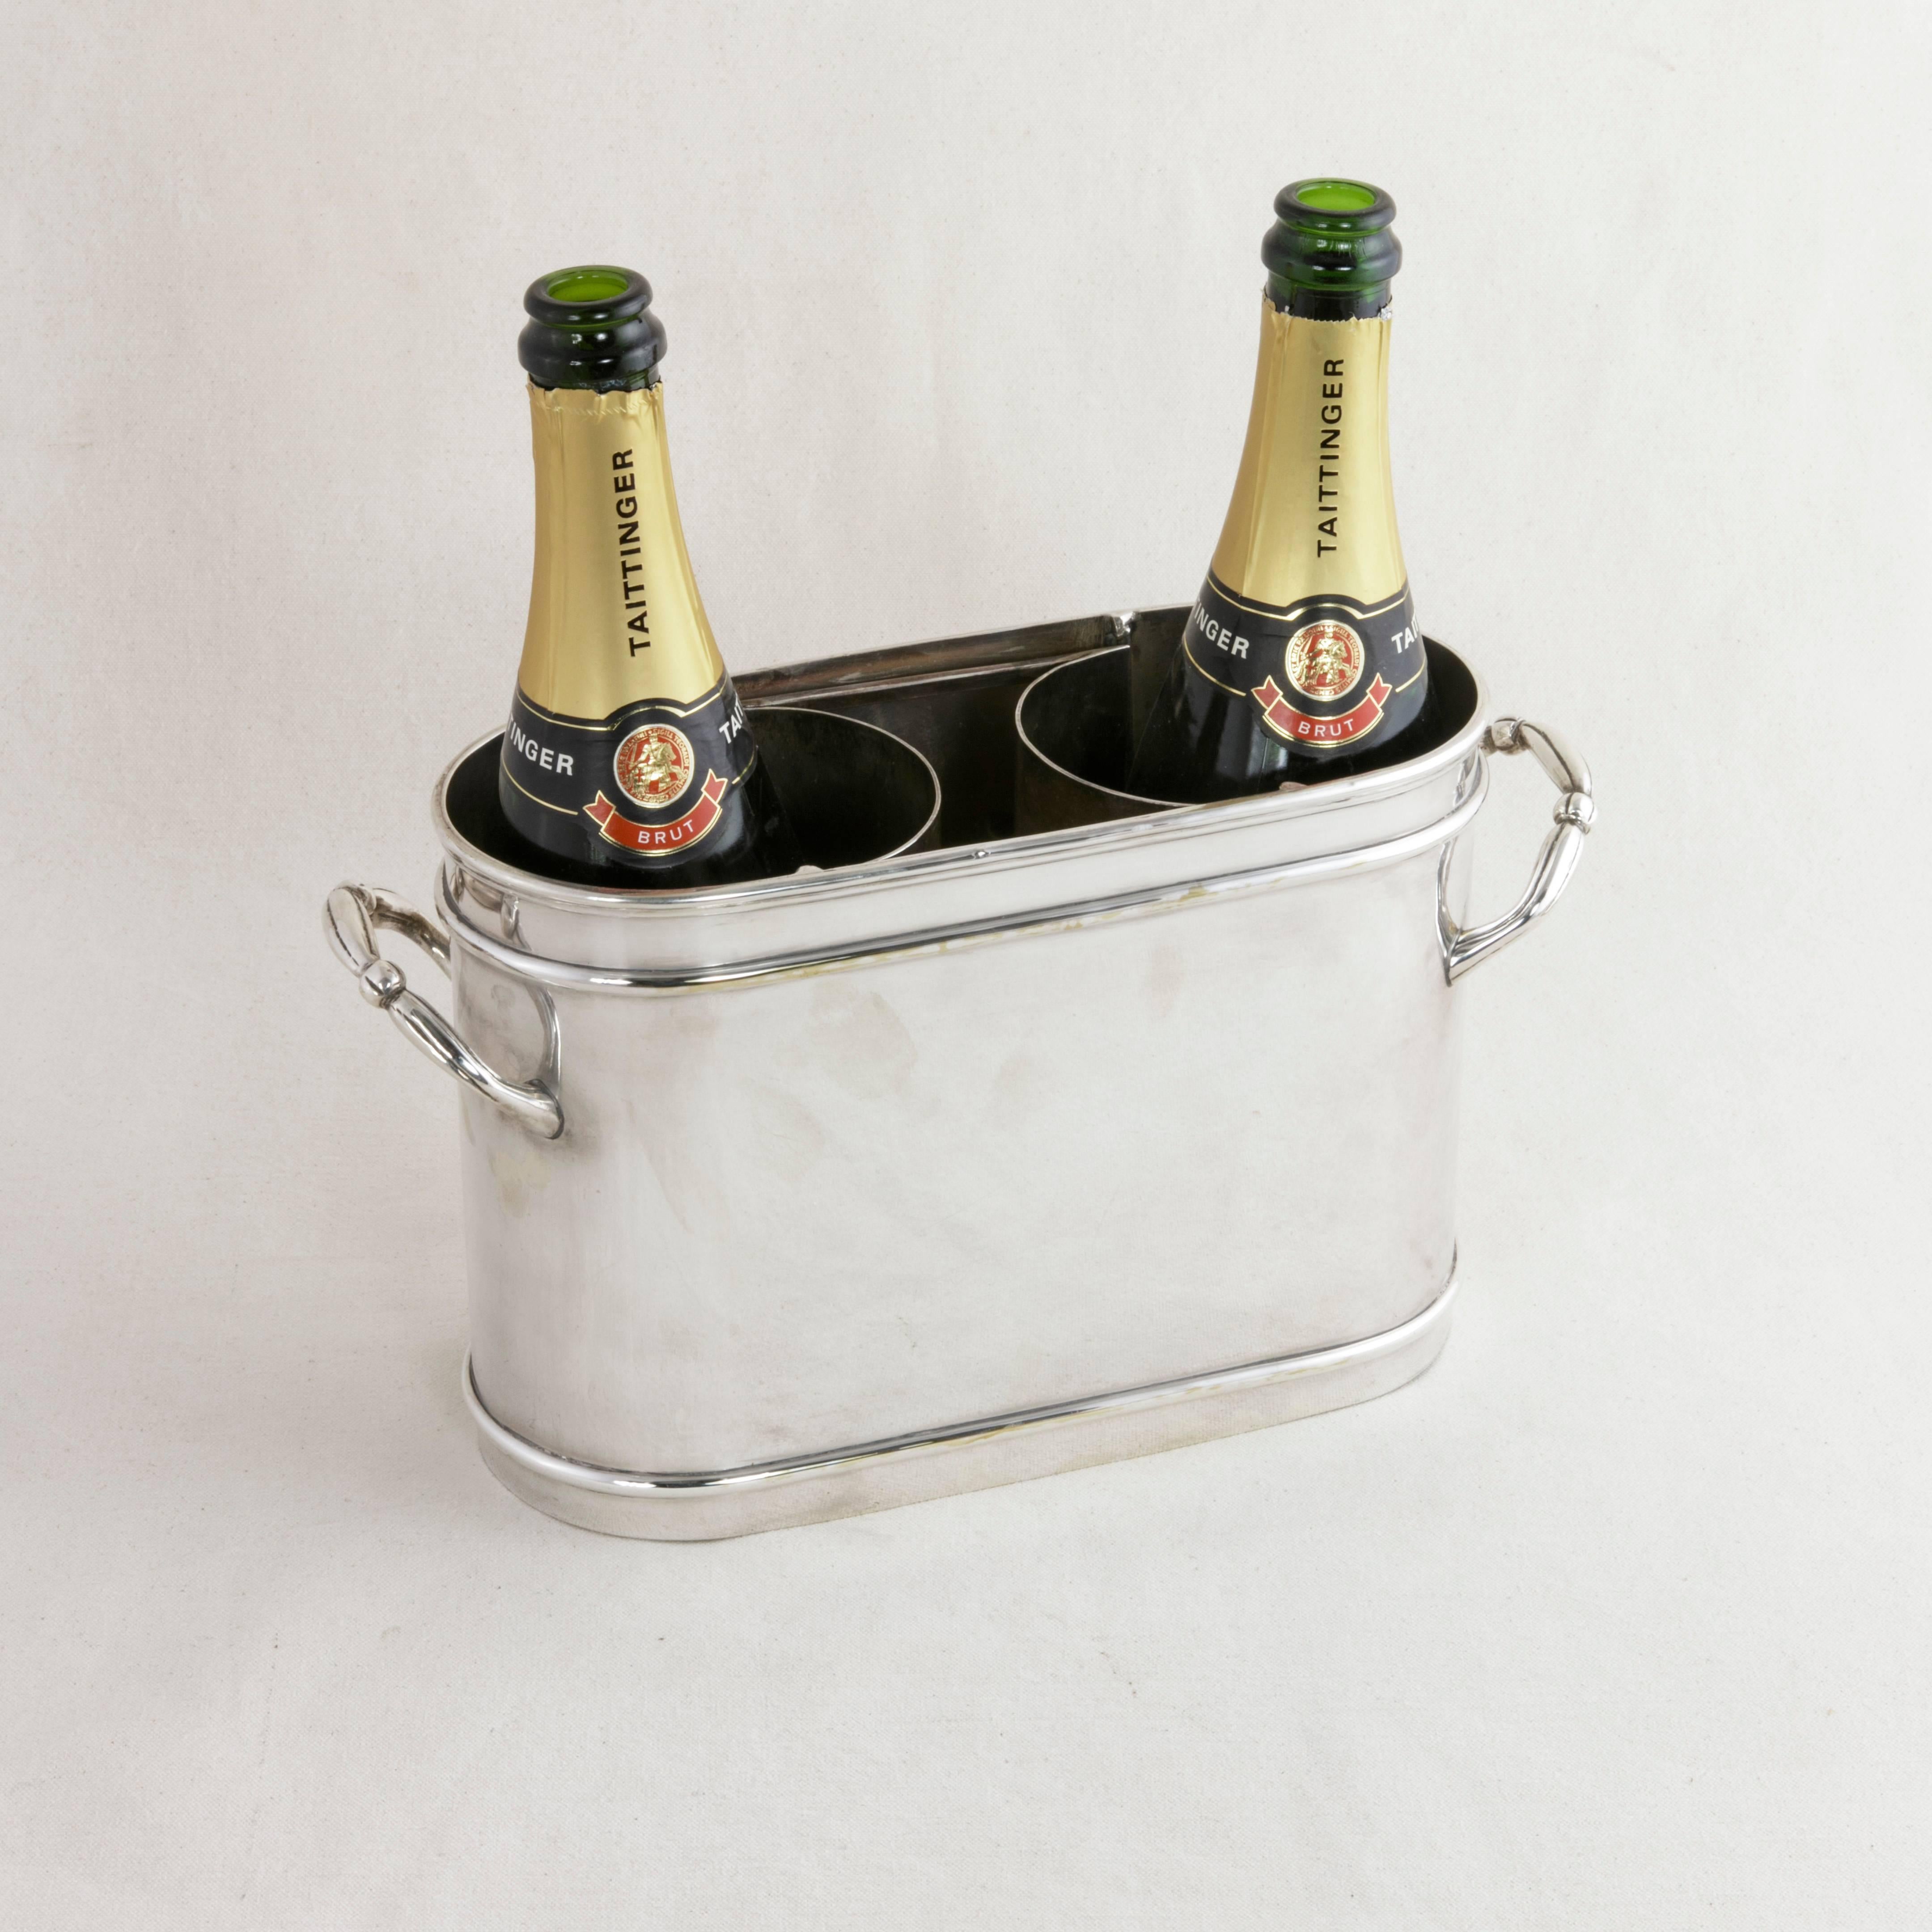 This unique French silver plate champagne bucket or wine chiller from the mid-20th century has an unusual oval form detailed with banding and features a removable pierced divider that separates the two bottles it accommodates. Two handles allow for